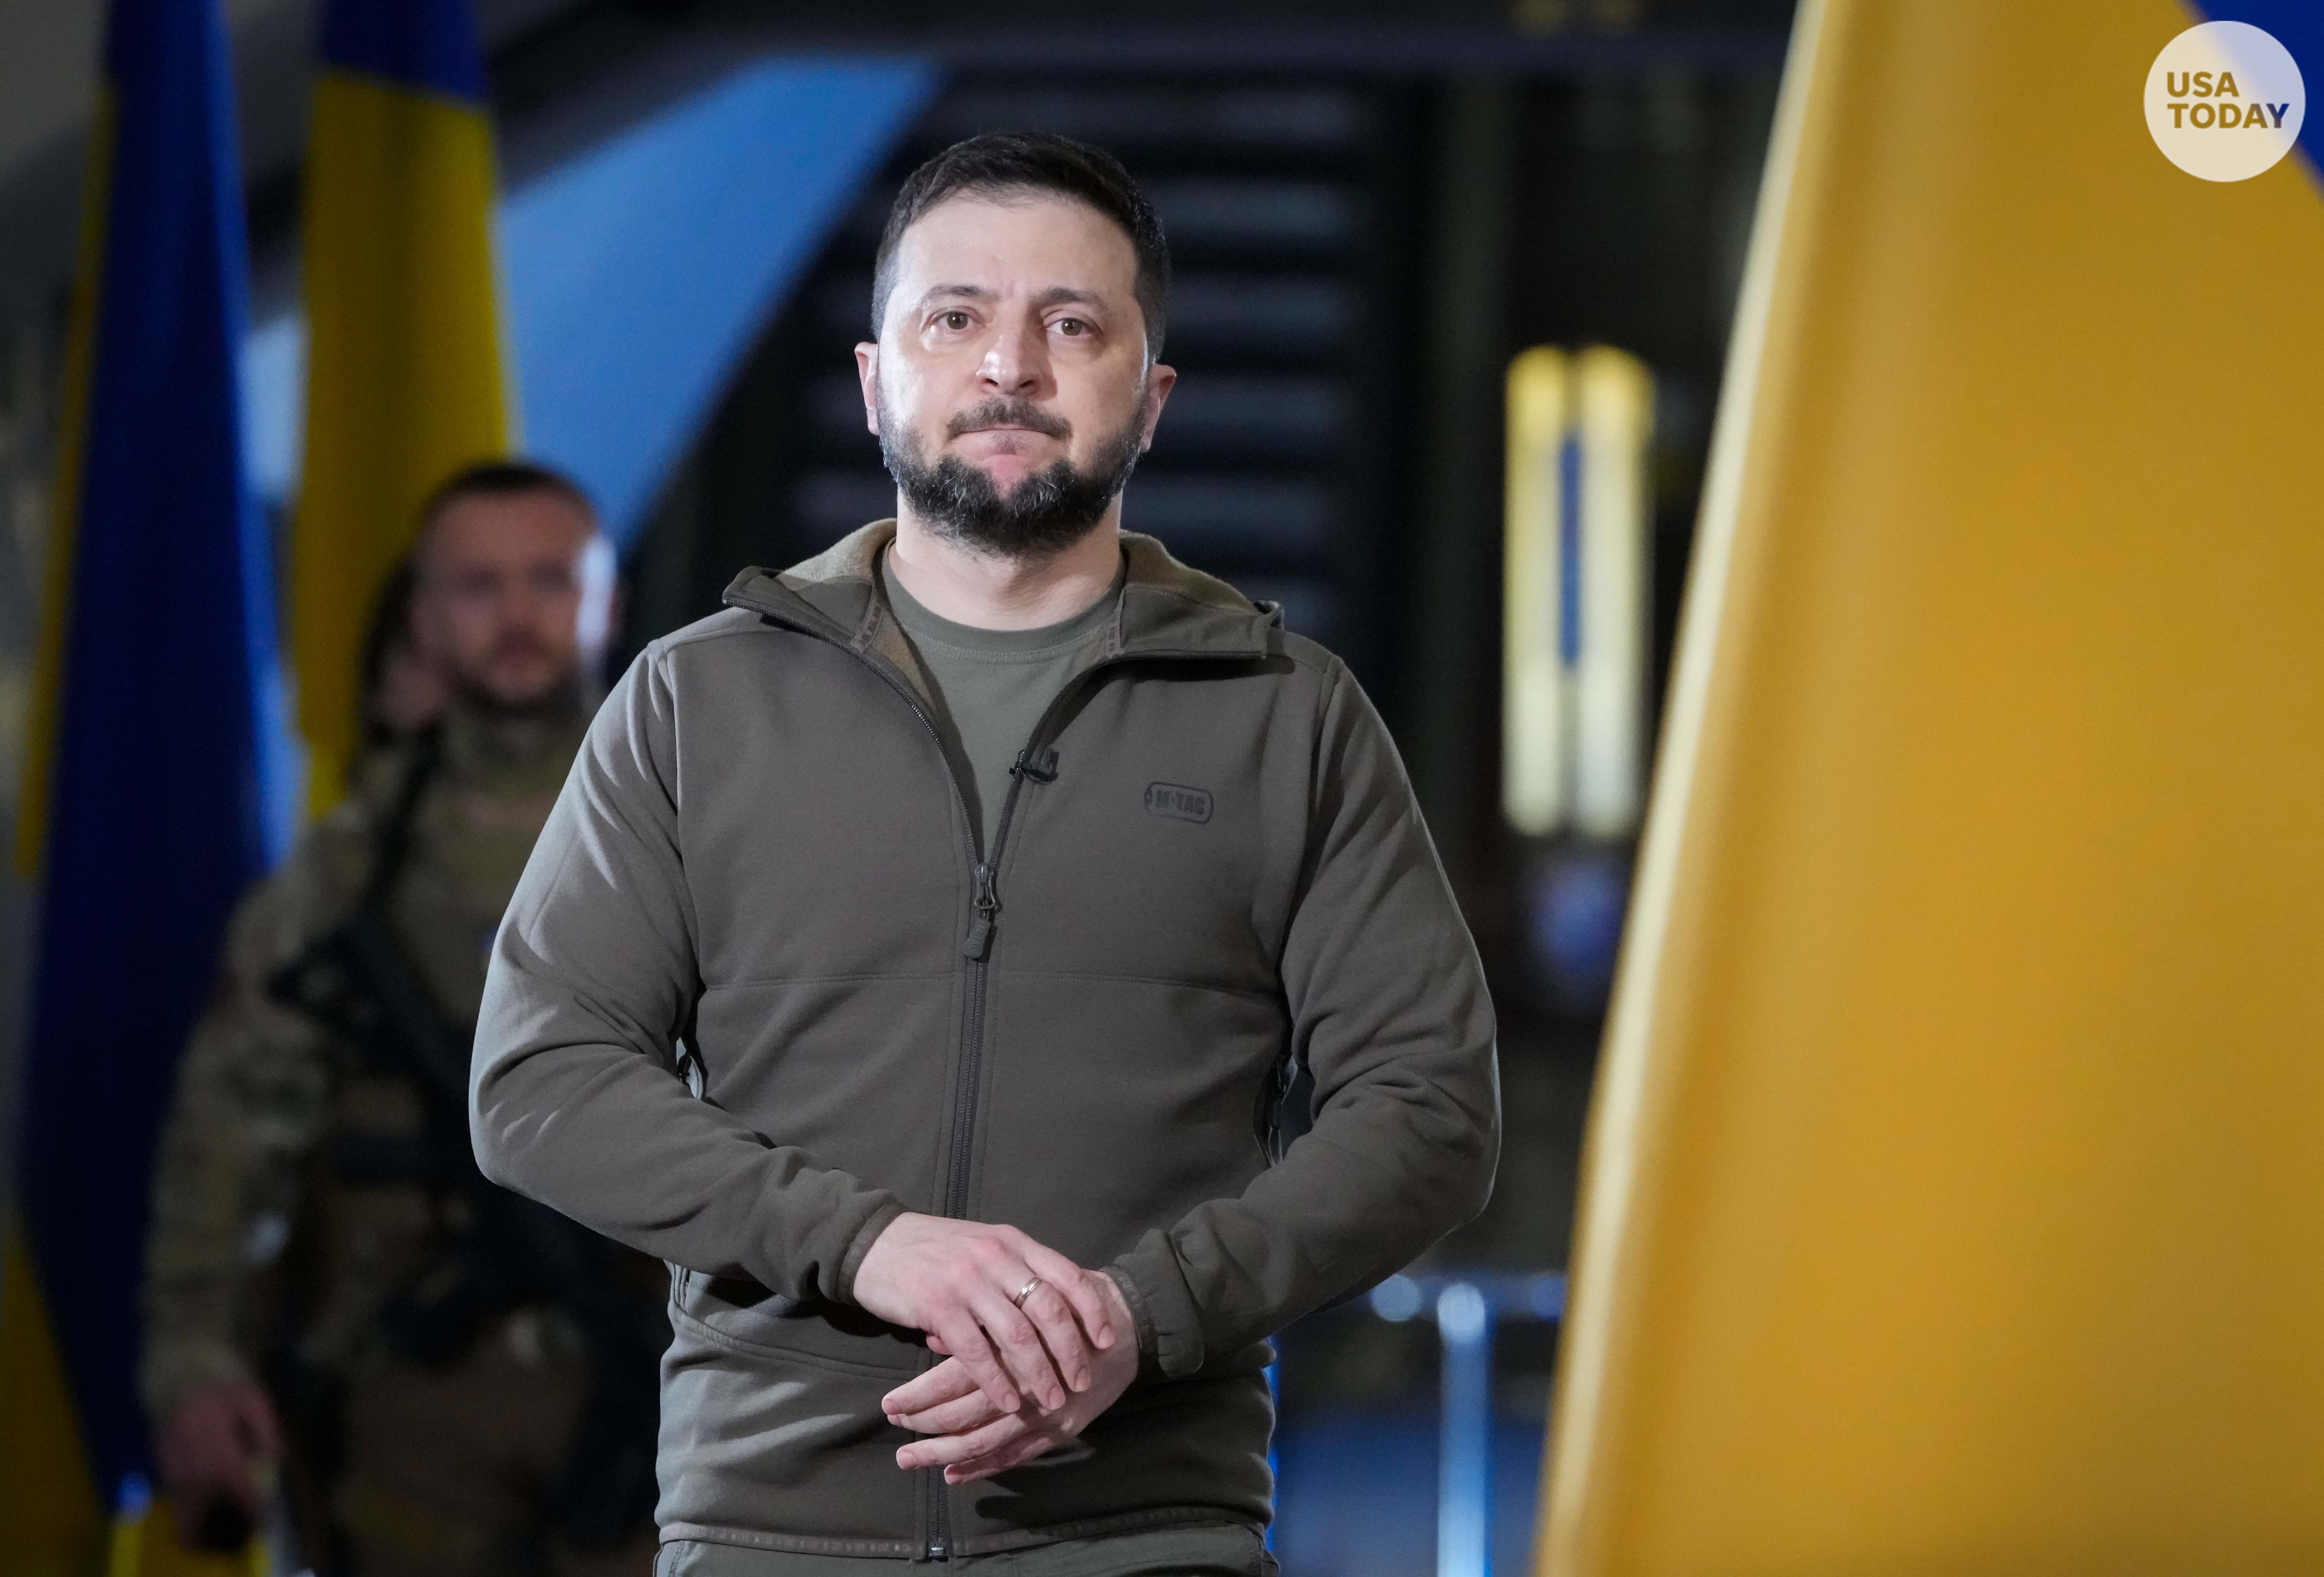 600 civilians died in March theater bombing in Mariupol; Zelenskyy says Russian advance halted: Live Ukraine updates thumbnail